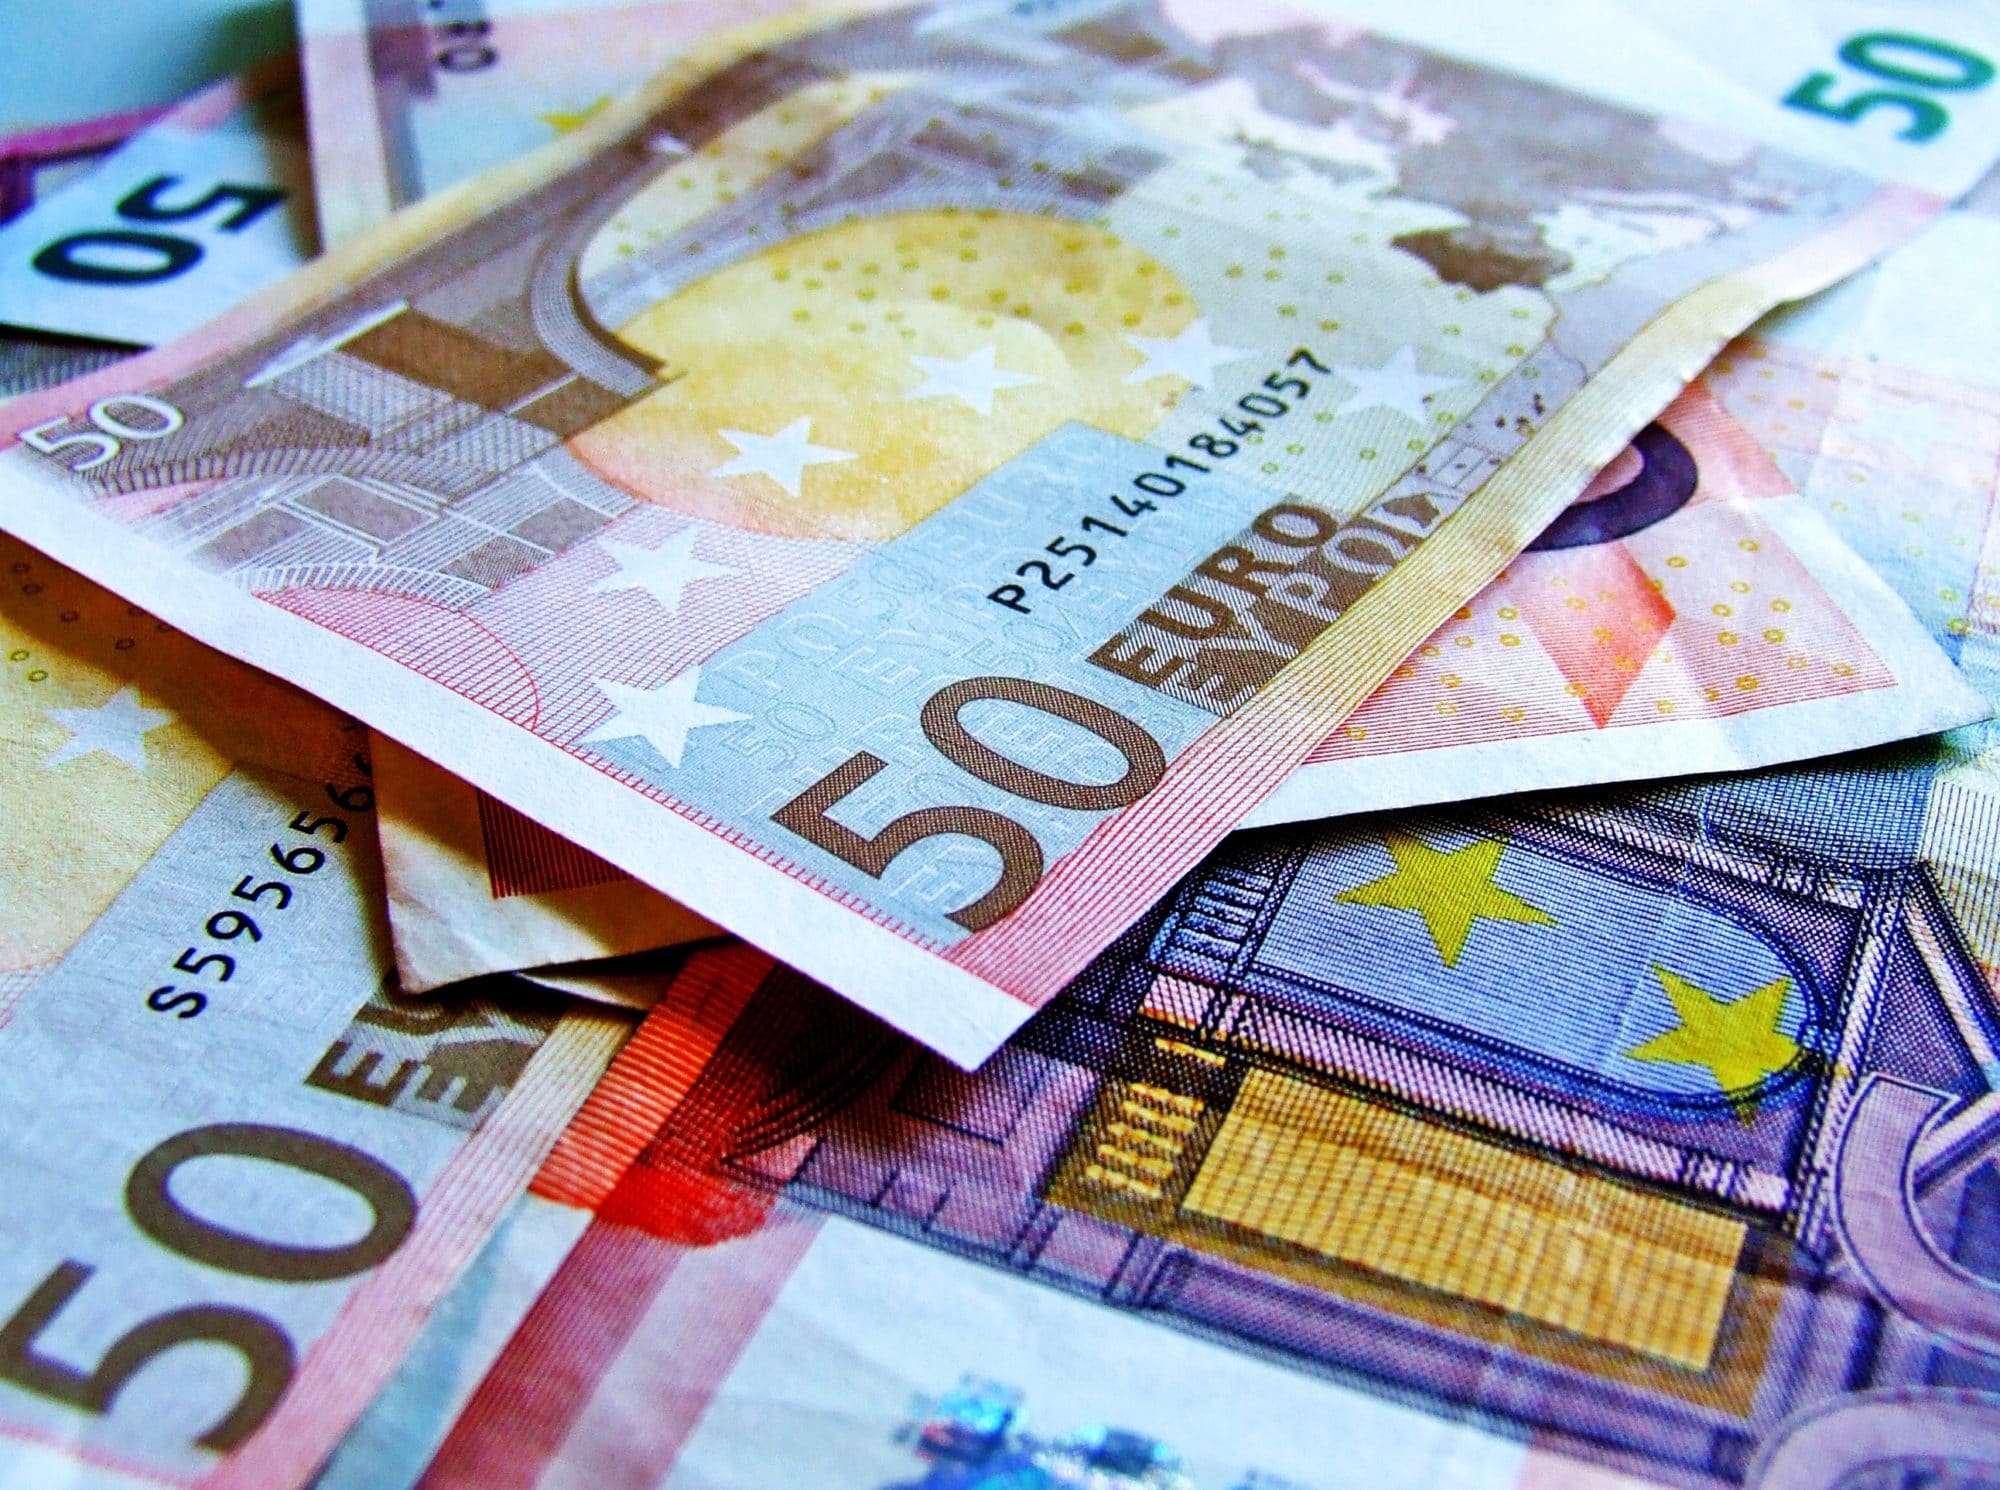 Malta's banking system uses the euro as its currency and is generally well-integrated into the broader European banking system.